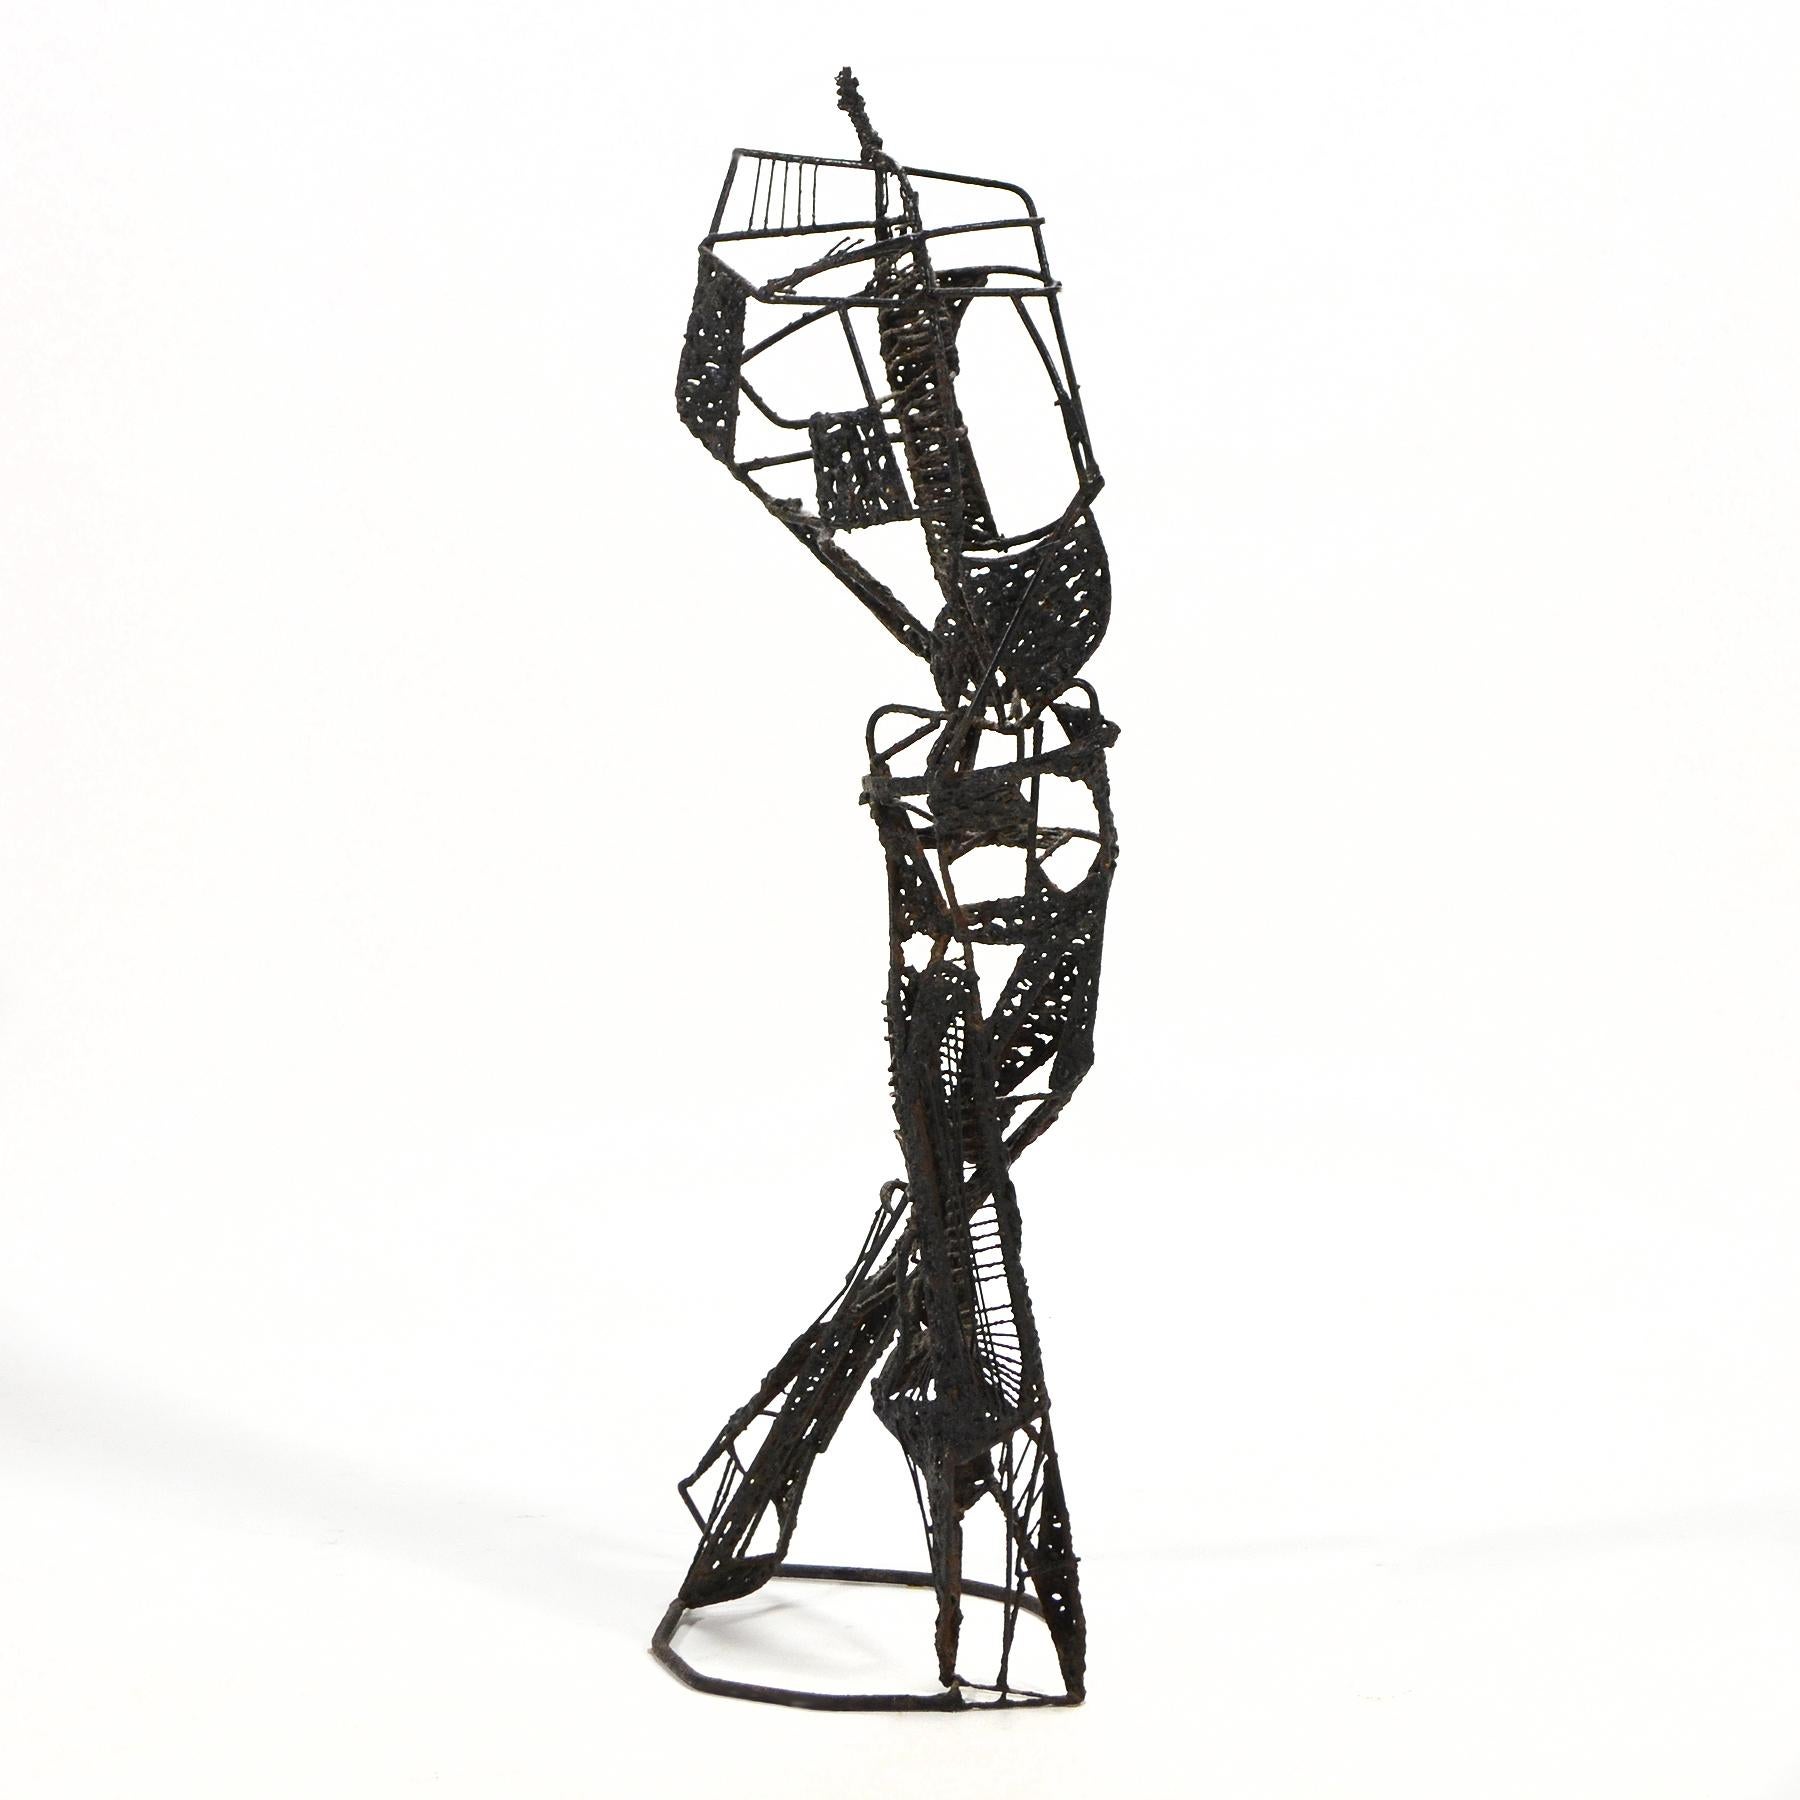 This terrific abstract sculpture conveys both a sense of motion and internal tension. With an edgy linear quality, it is like a drawing which has let into space.